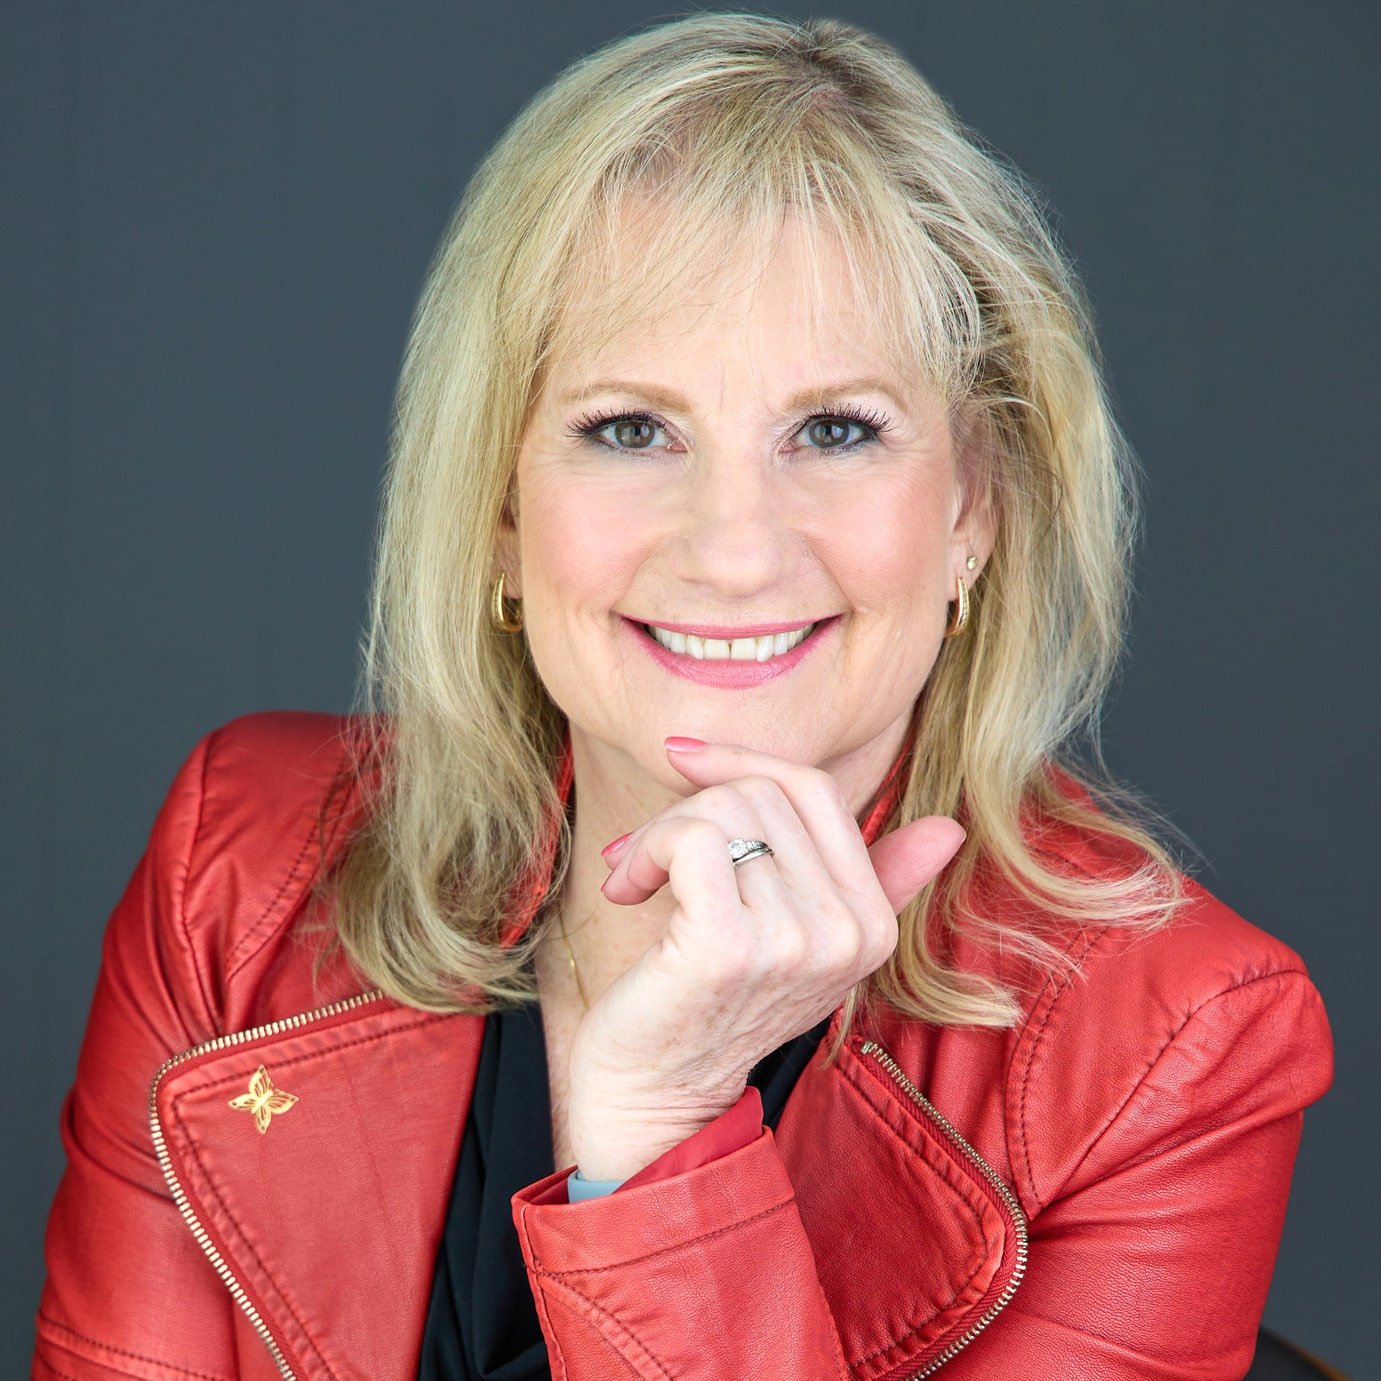 Head shot of Karen Covy in an Orange jacket smiling at the camera with her hand on her chin.